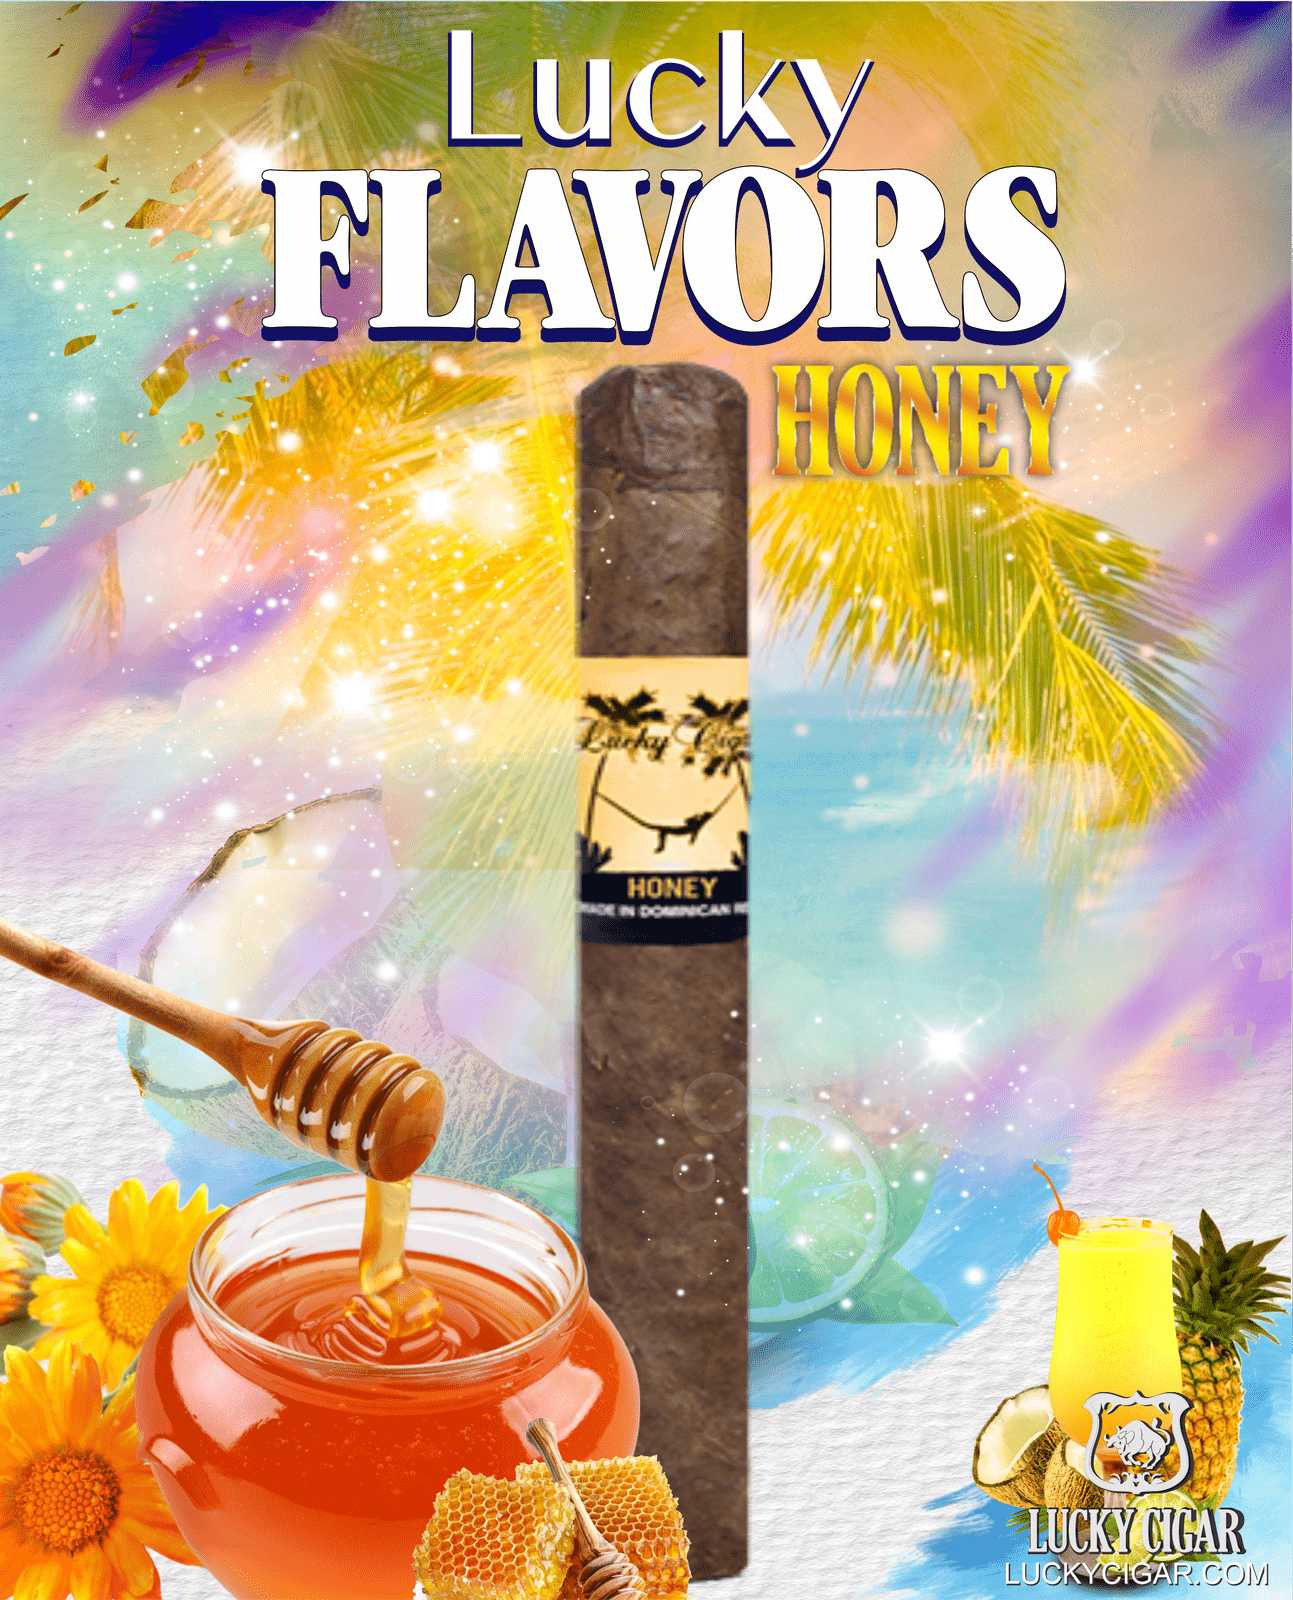 Flavored Cigars: Lucky Flavors Honey 5x42 Cigar